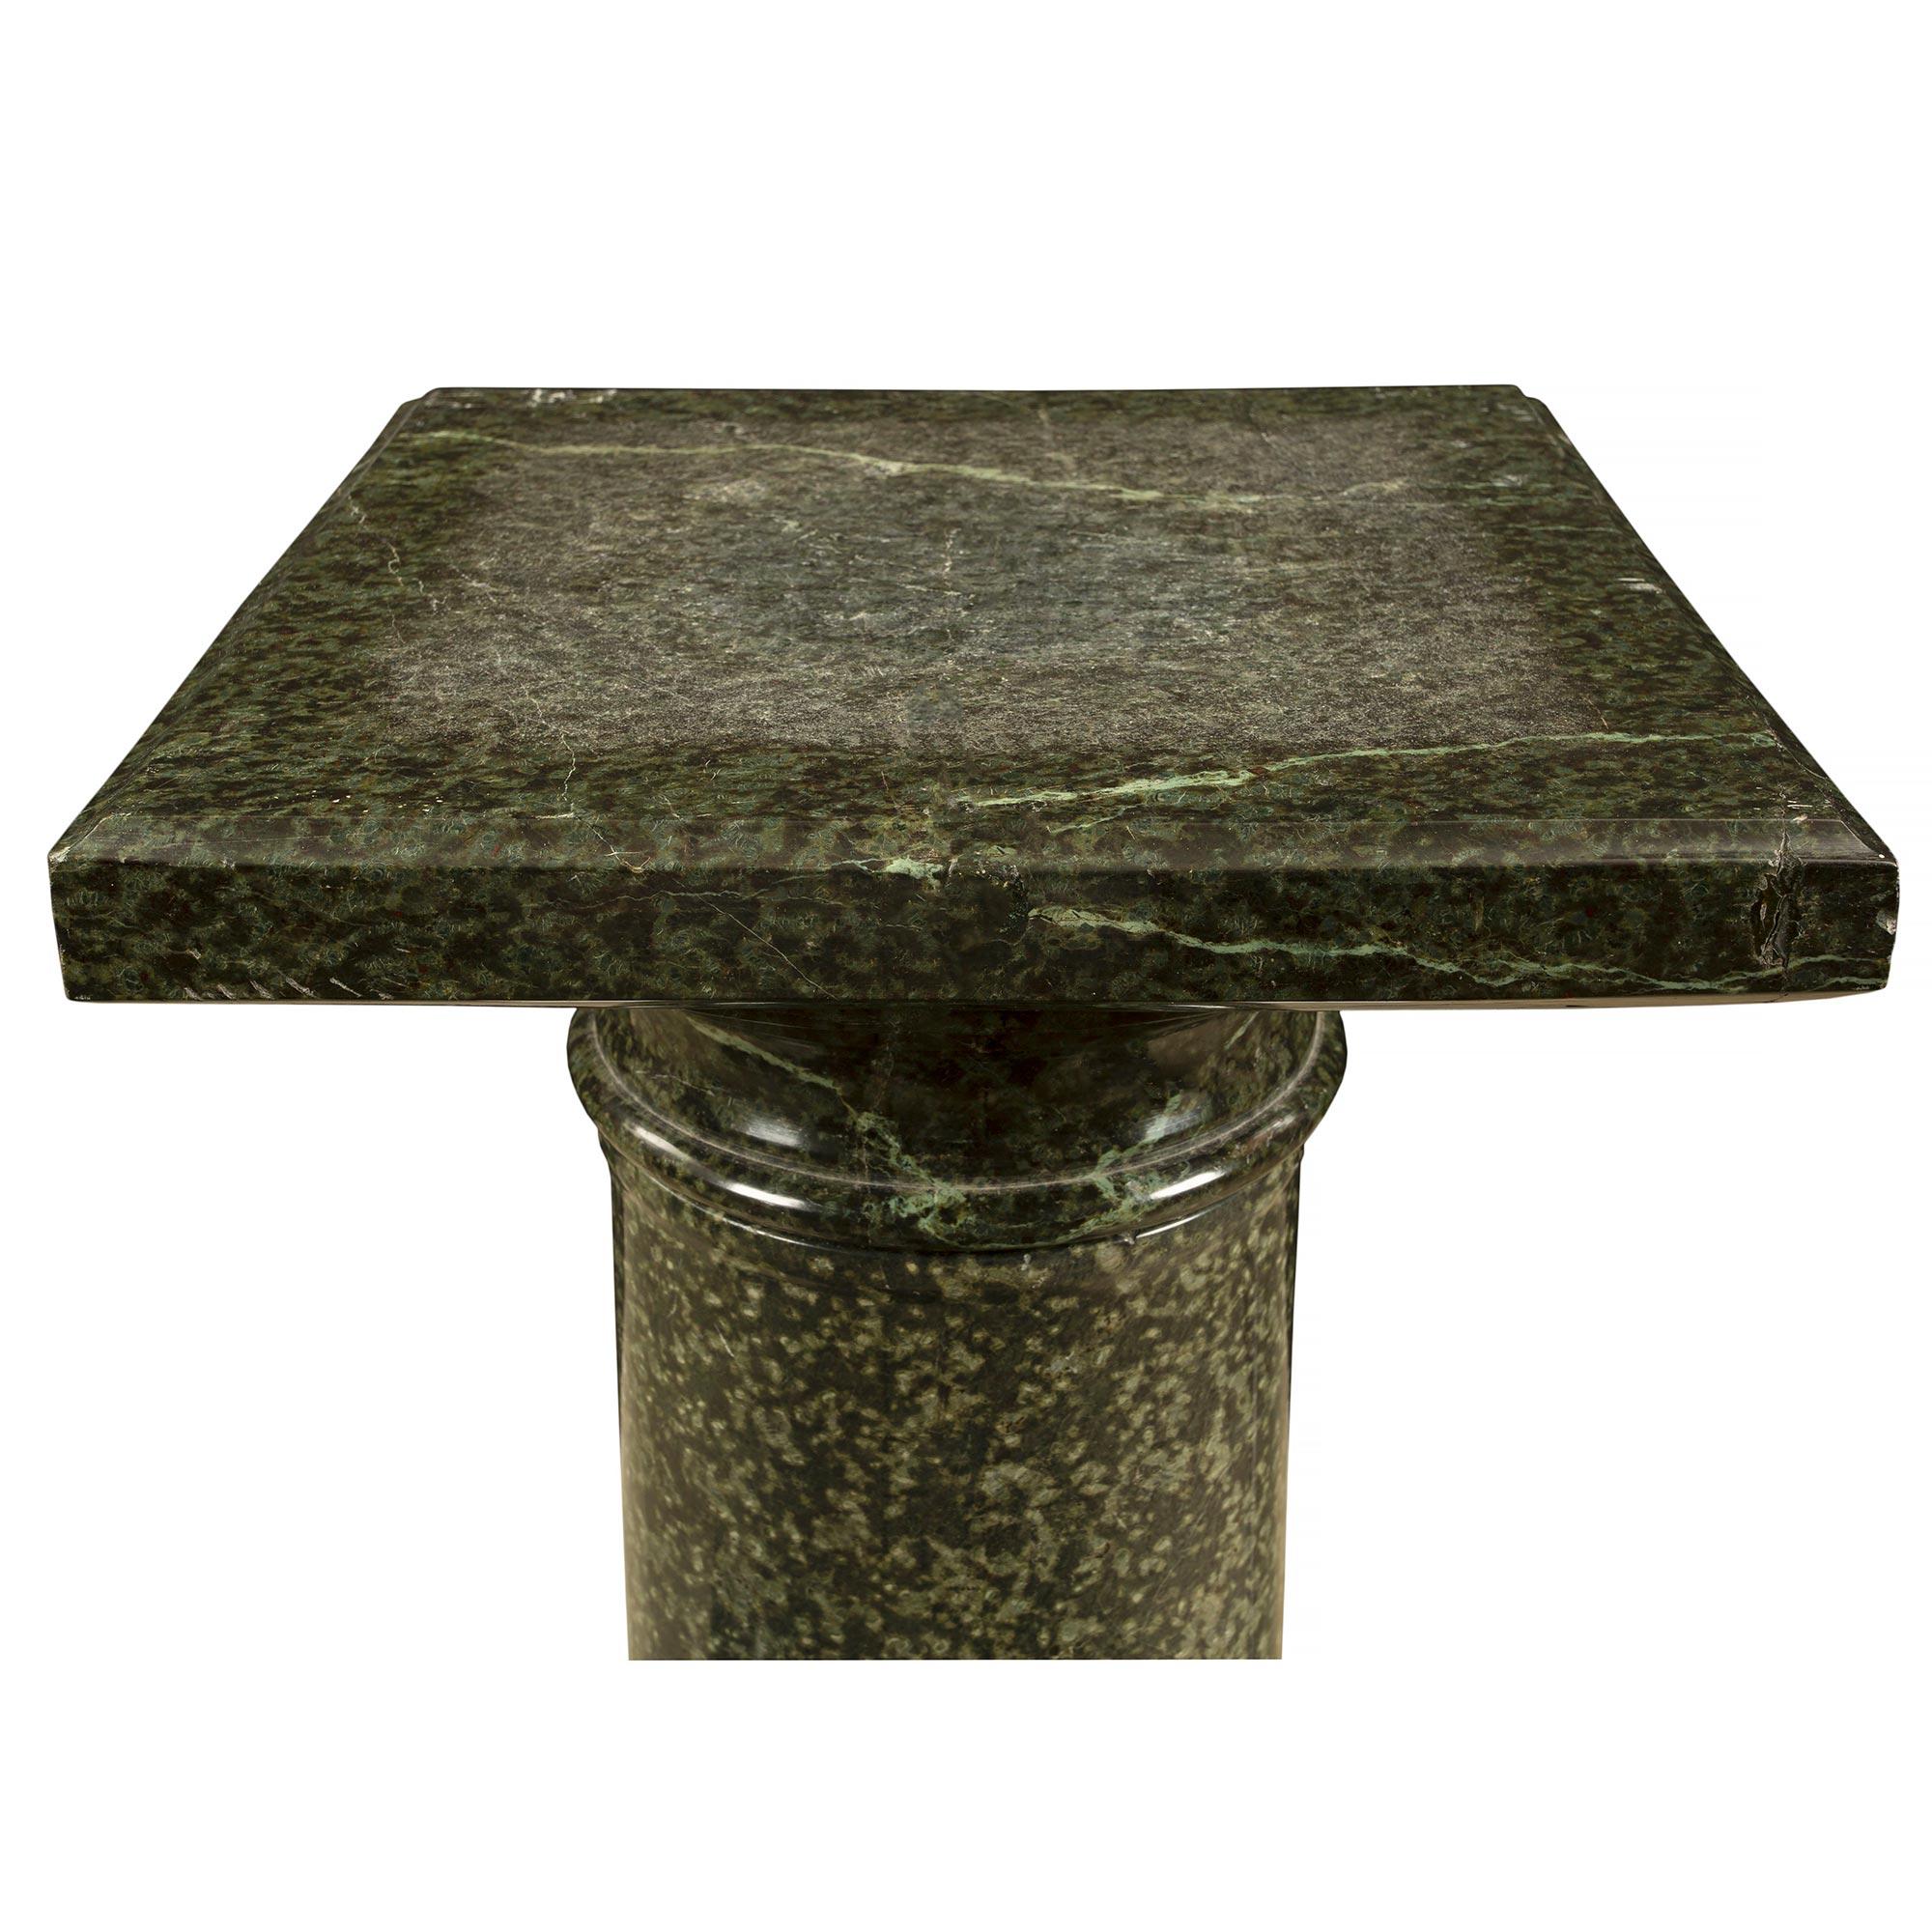 A fine Italian 19th century three piece green marble pedestal. The pedestal is raised by an octagon base with a mottled circular design above. The circular column has a carved design at the base. At the top is a square swivel shelf.